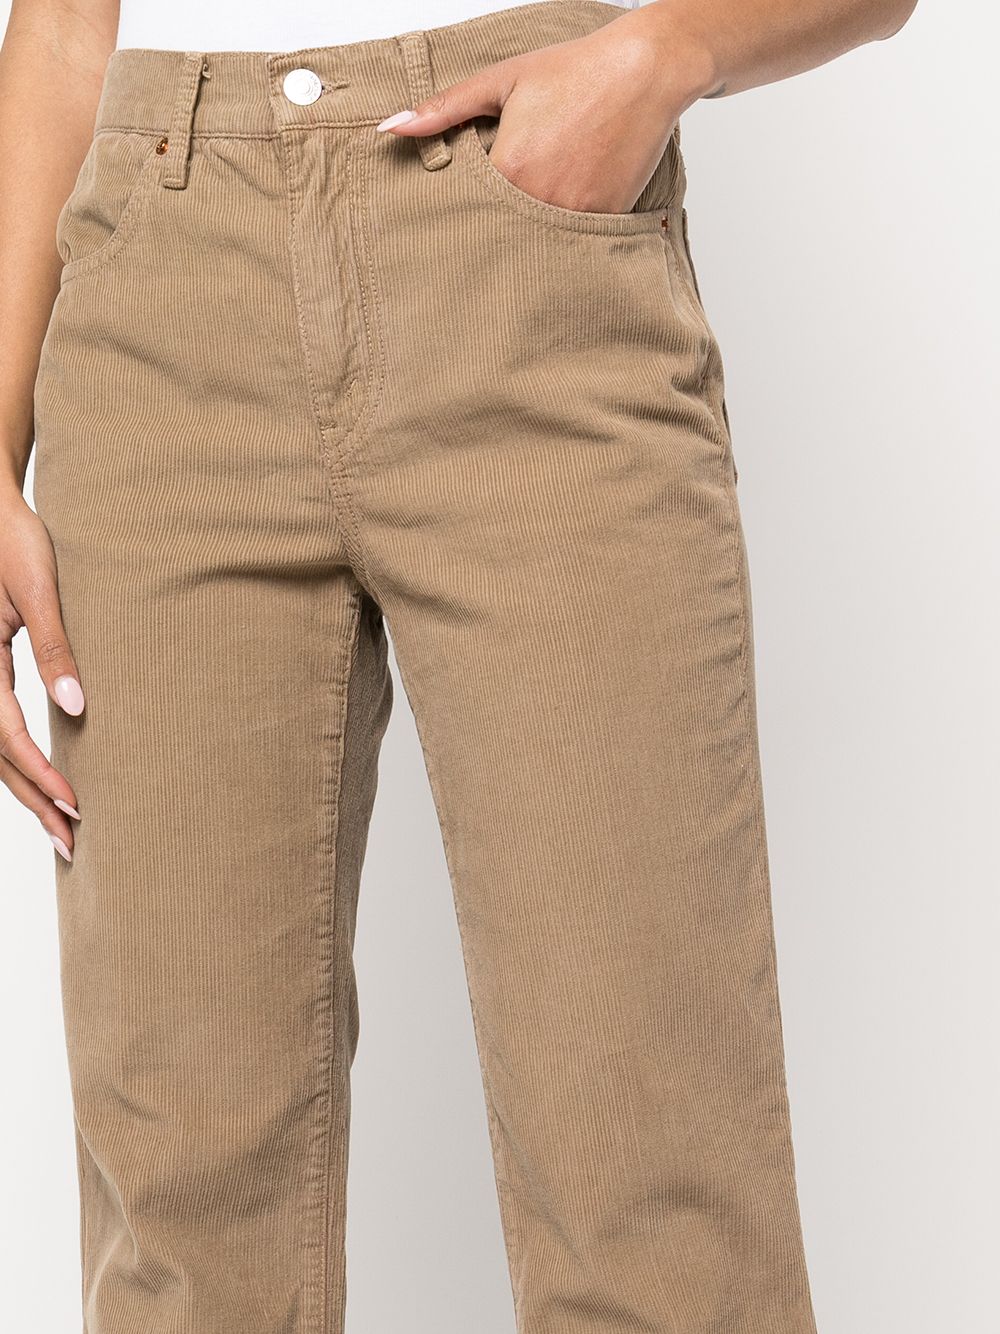 RE/DONE 70s Flared Corduroy Trousers - Farfetch